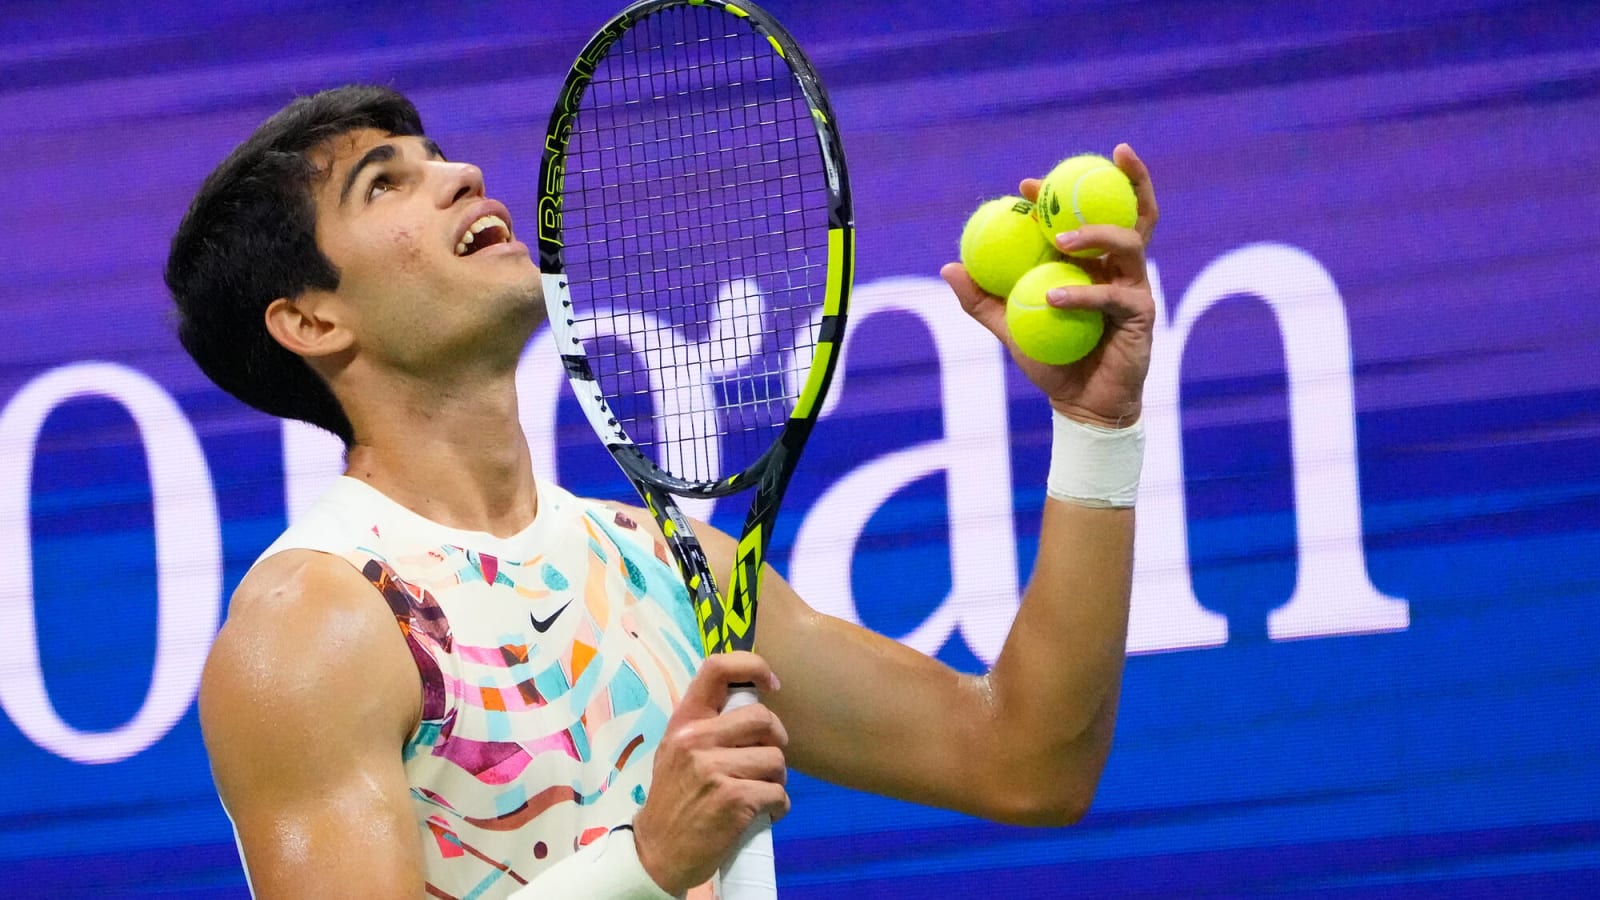 'I was mad all the time,' Teenage prodigy Carlos Alcaraz reveals the secret to his beaming smile even during the most difficult of matches in a conversation with John McEnroe